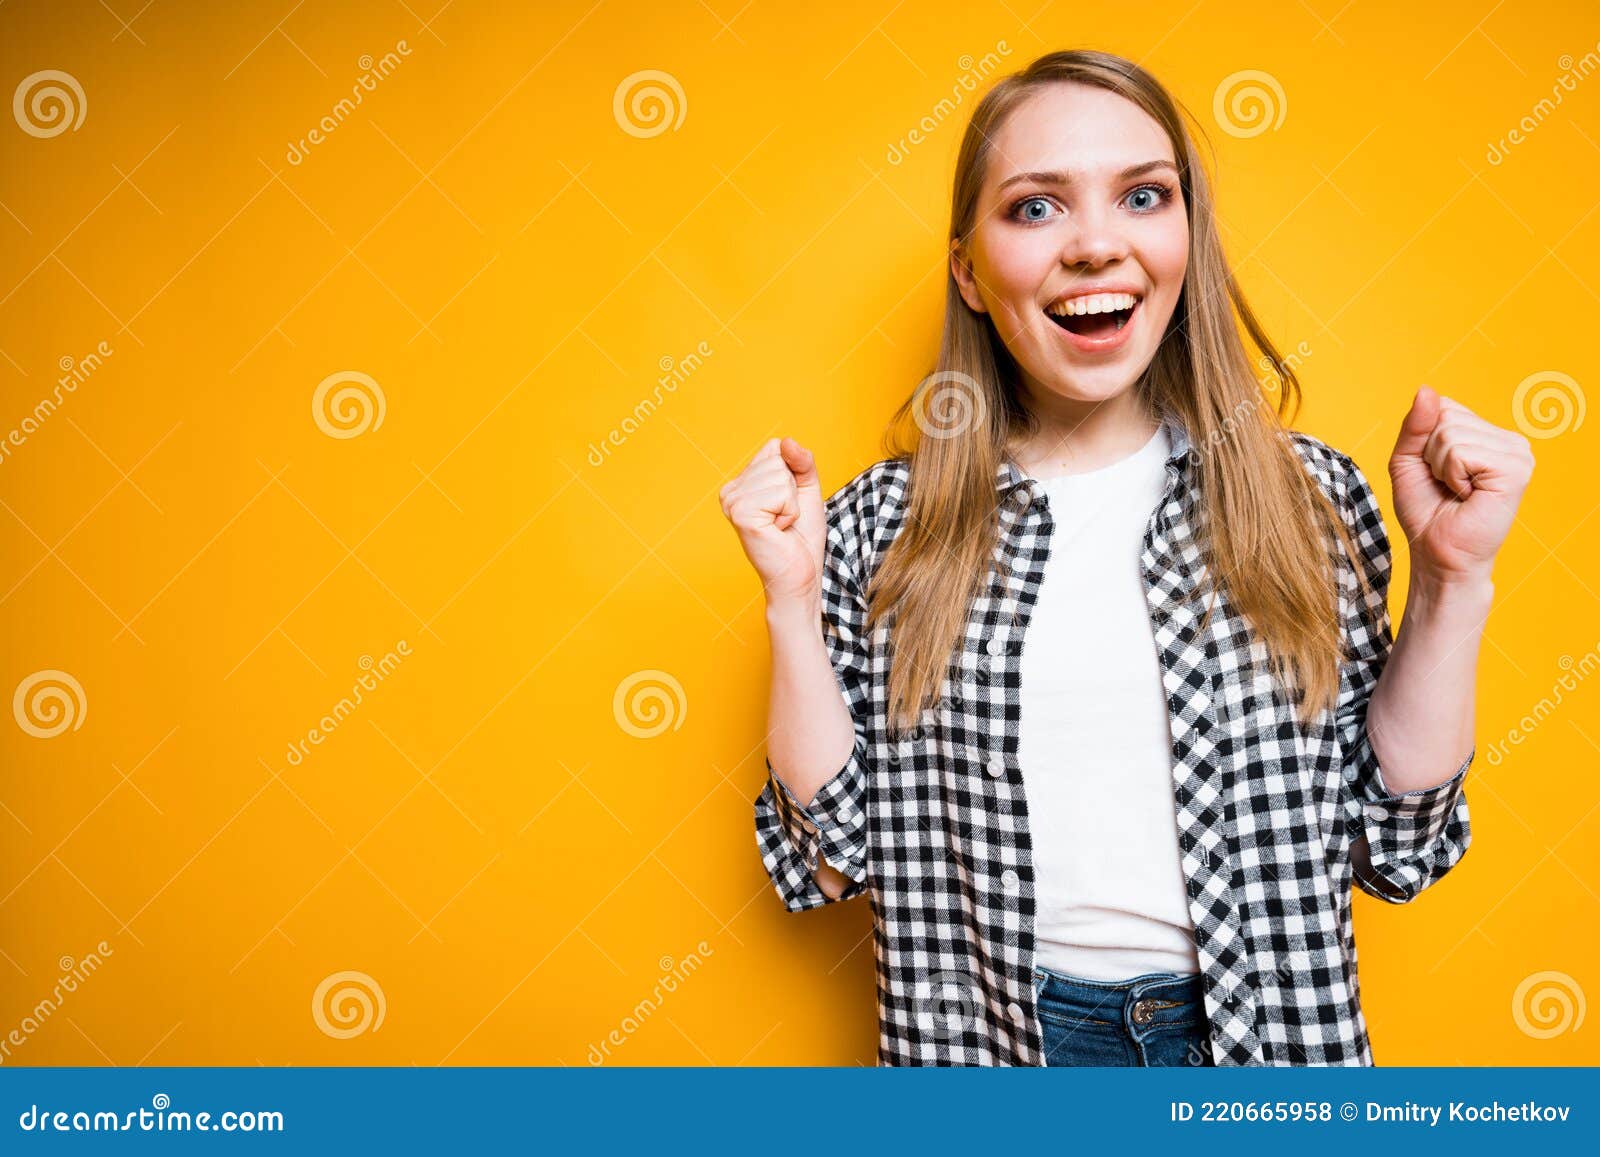 happy girl in a plaid shirt rejoices in victory clenching her hands into fists, opening her mouth